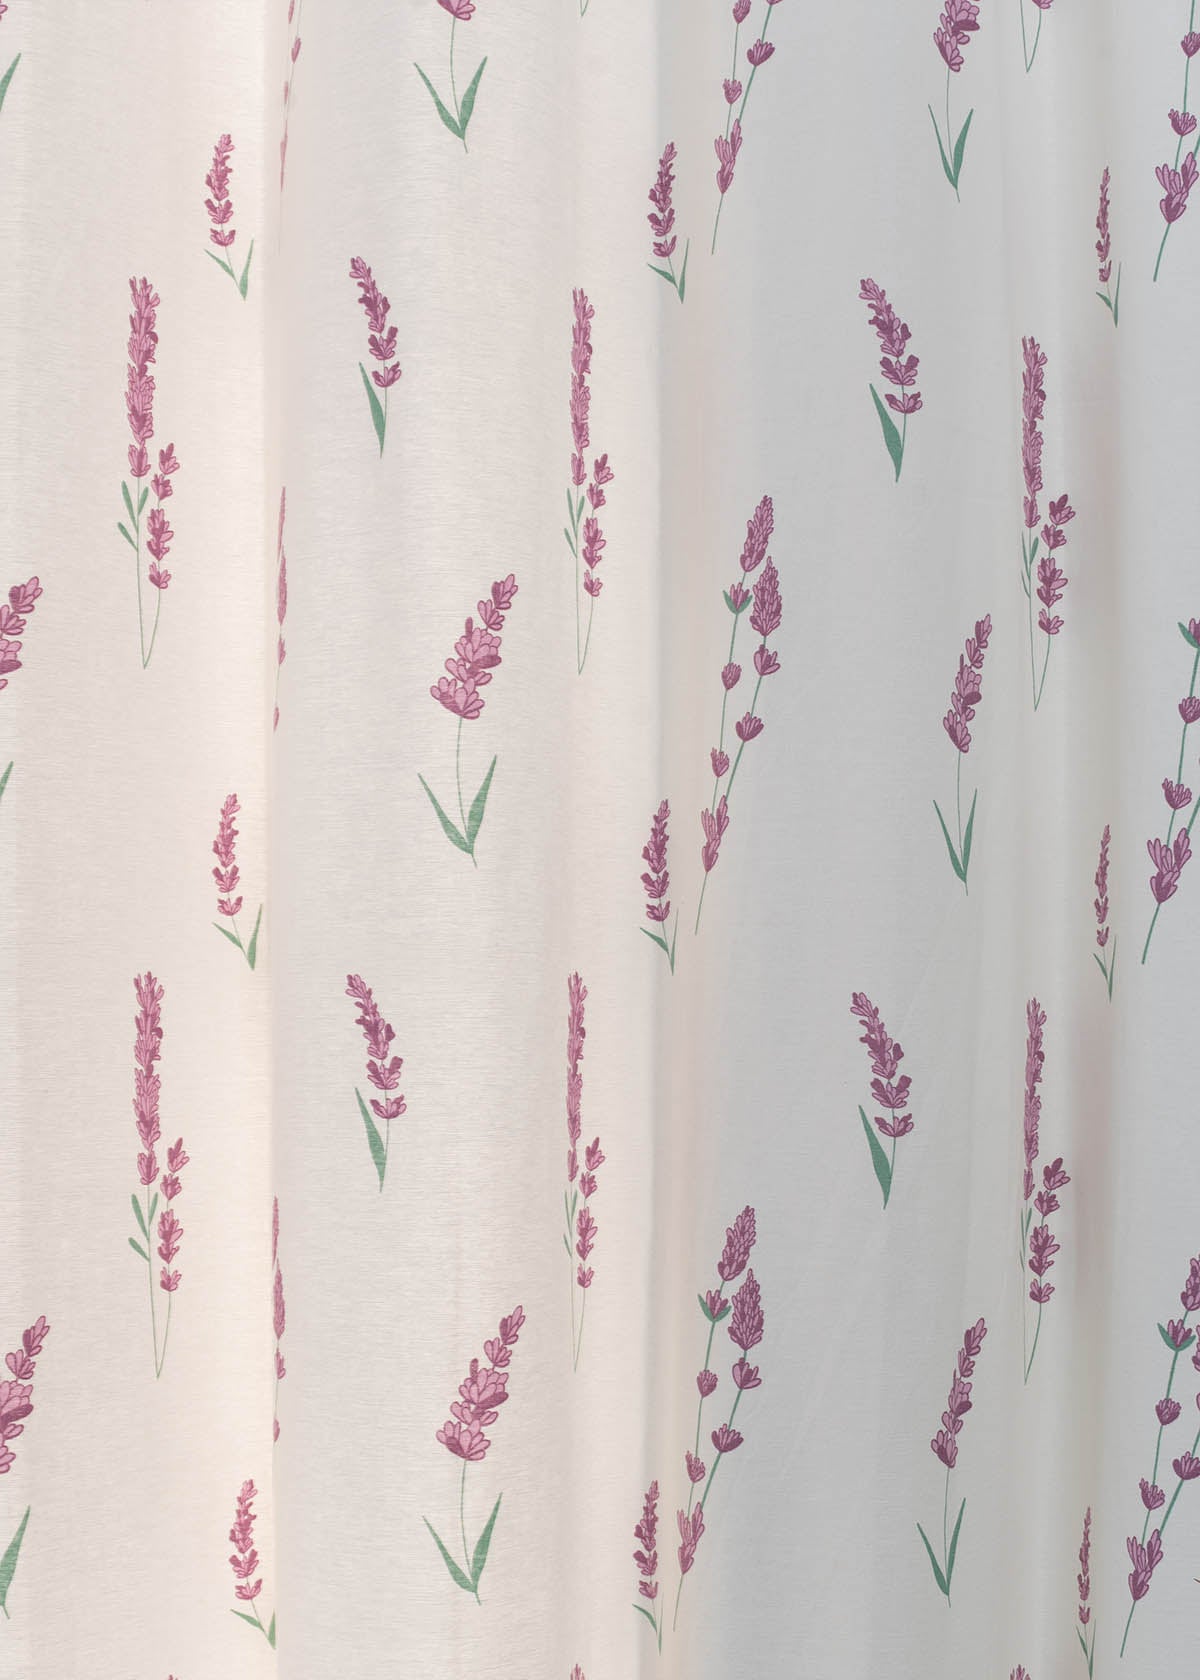 Fields of Lavender 100% Customizable Cotton floral curtain for kids room - Room darkening - Lavender